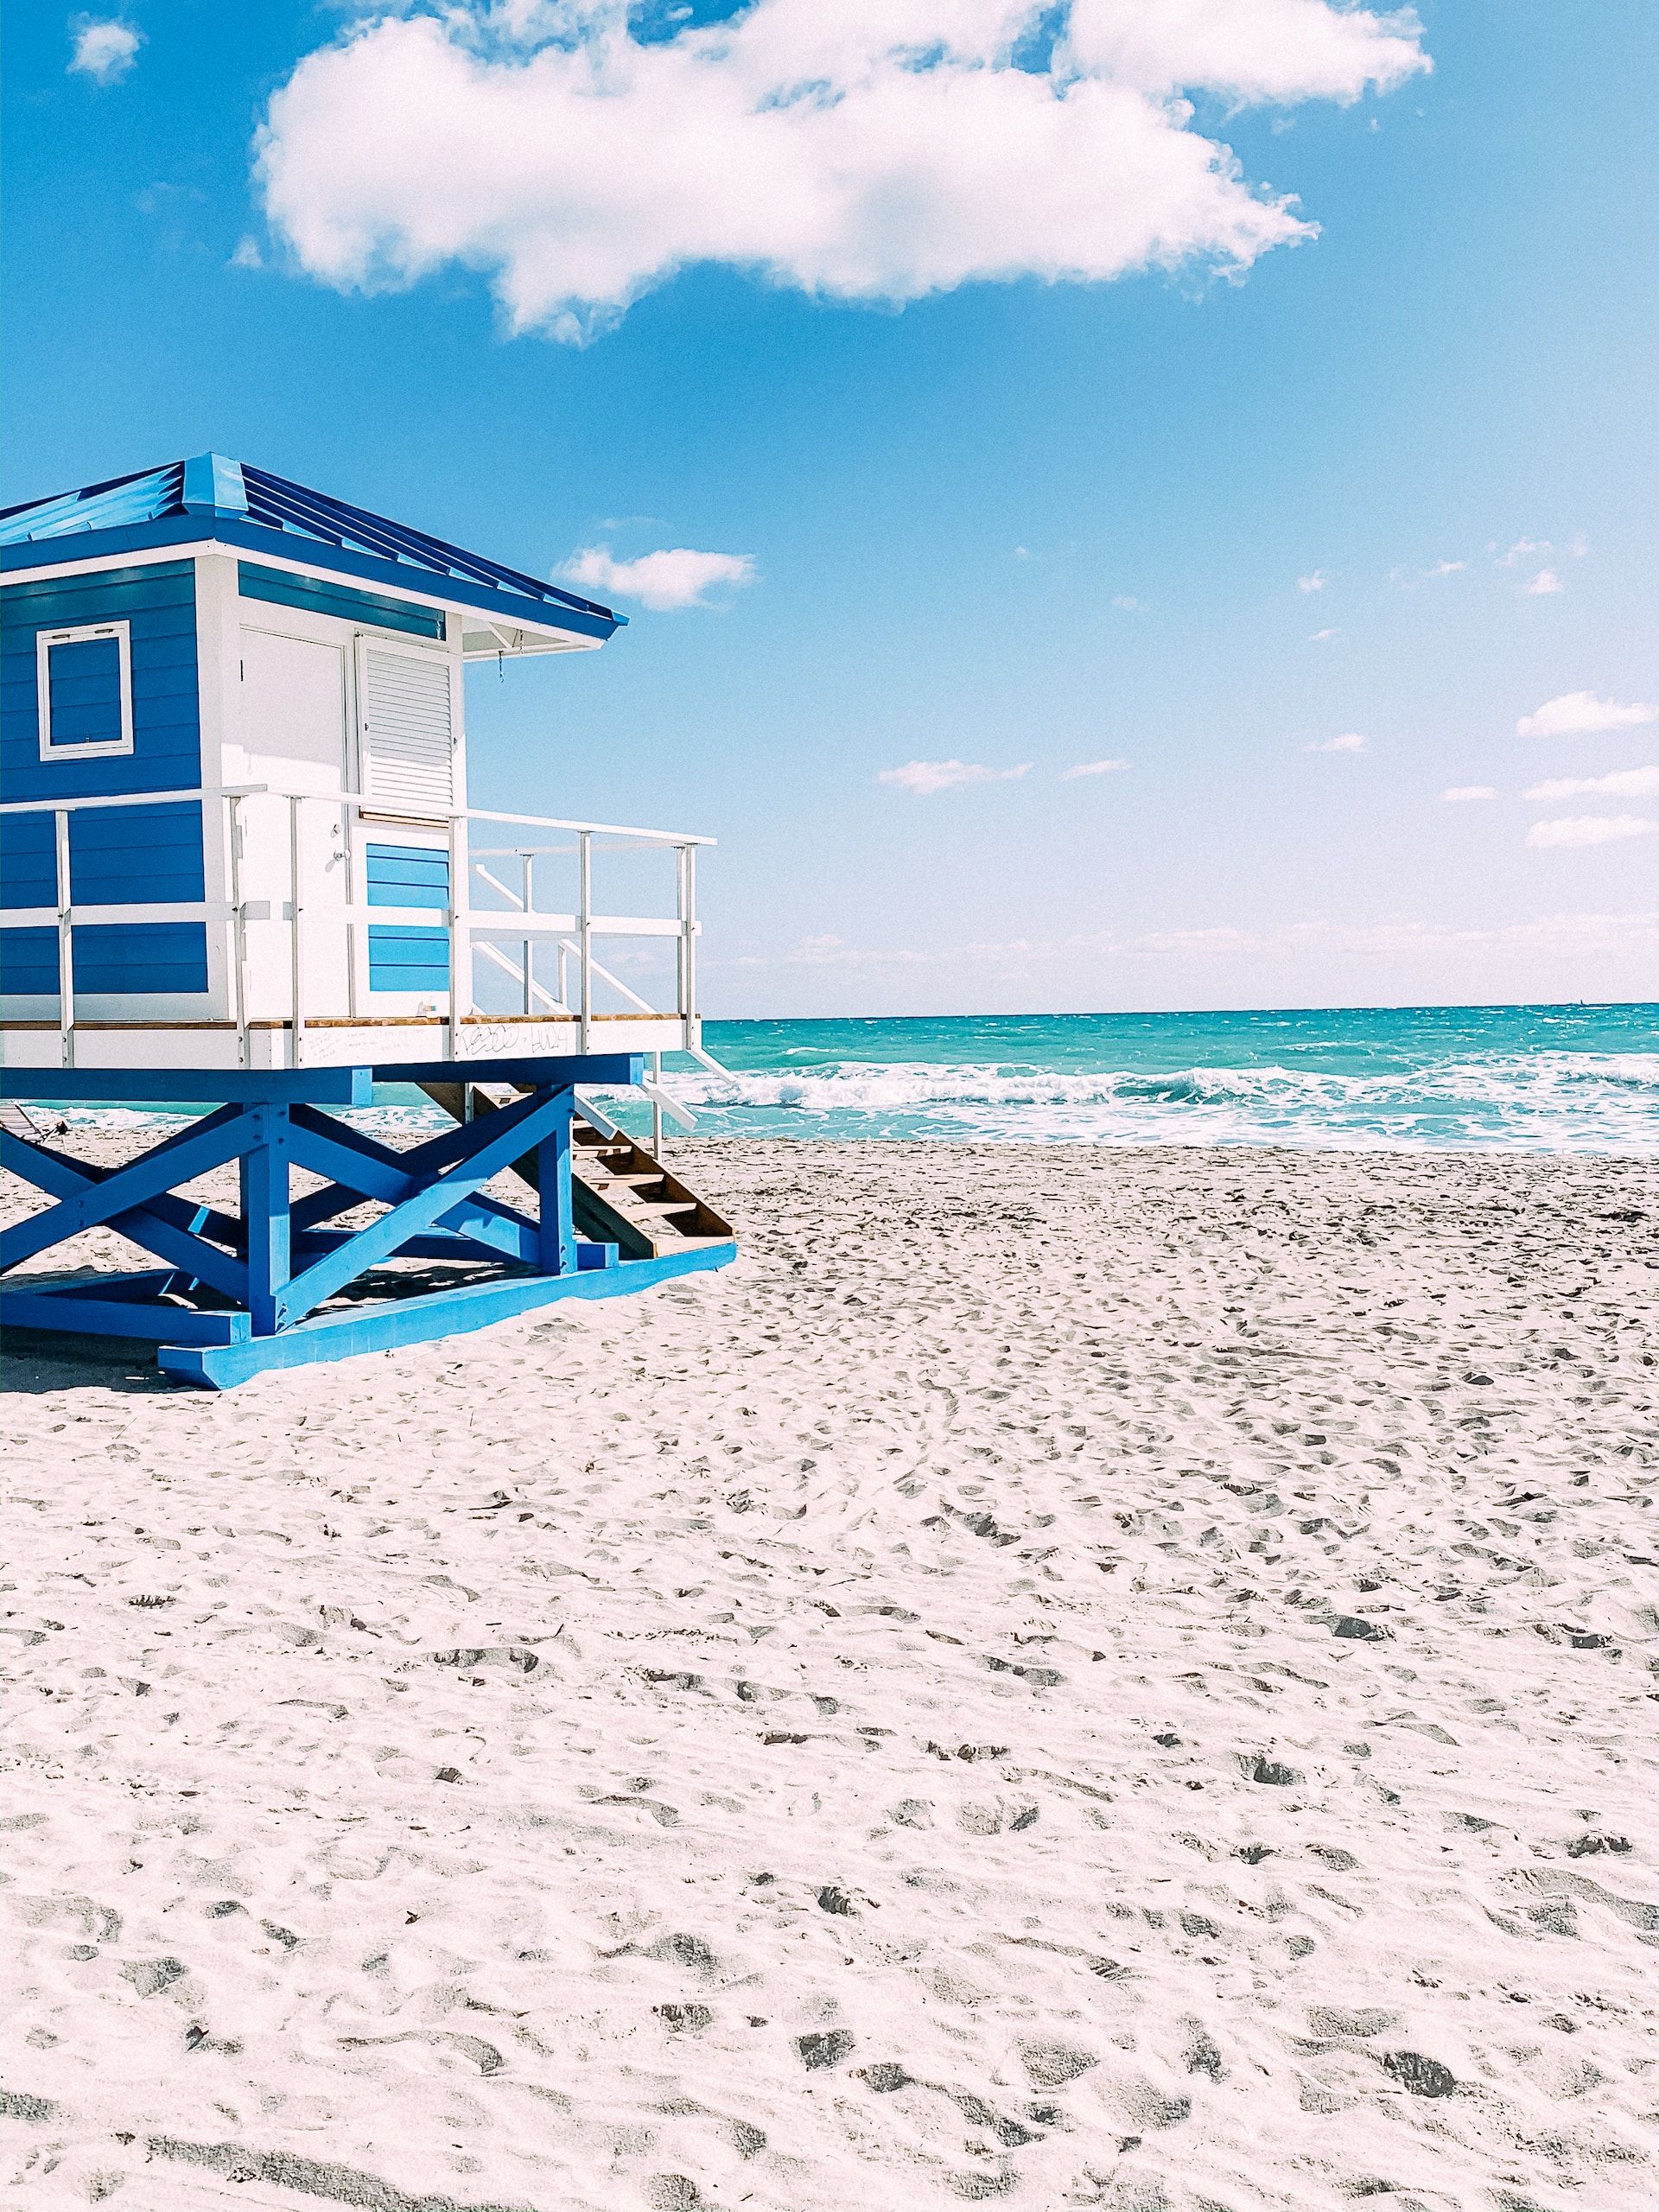 Lifeguard Tower on the beach in Florida